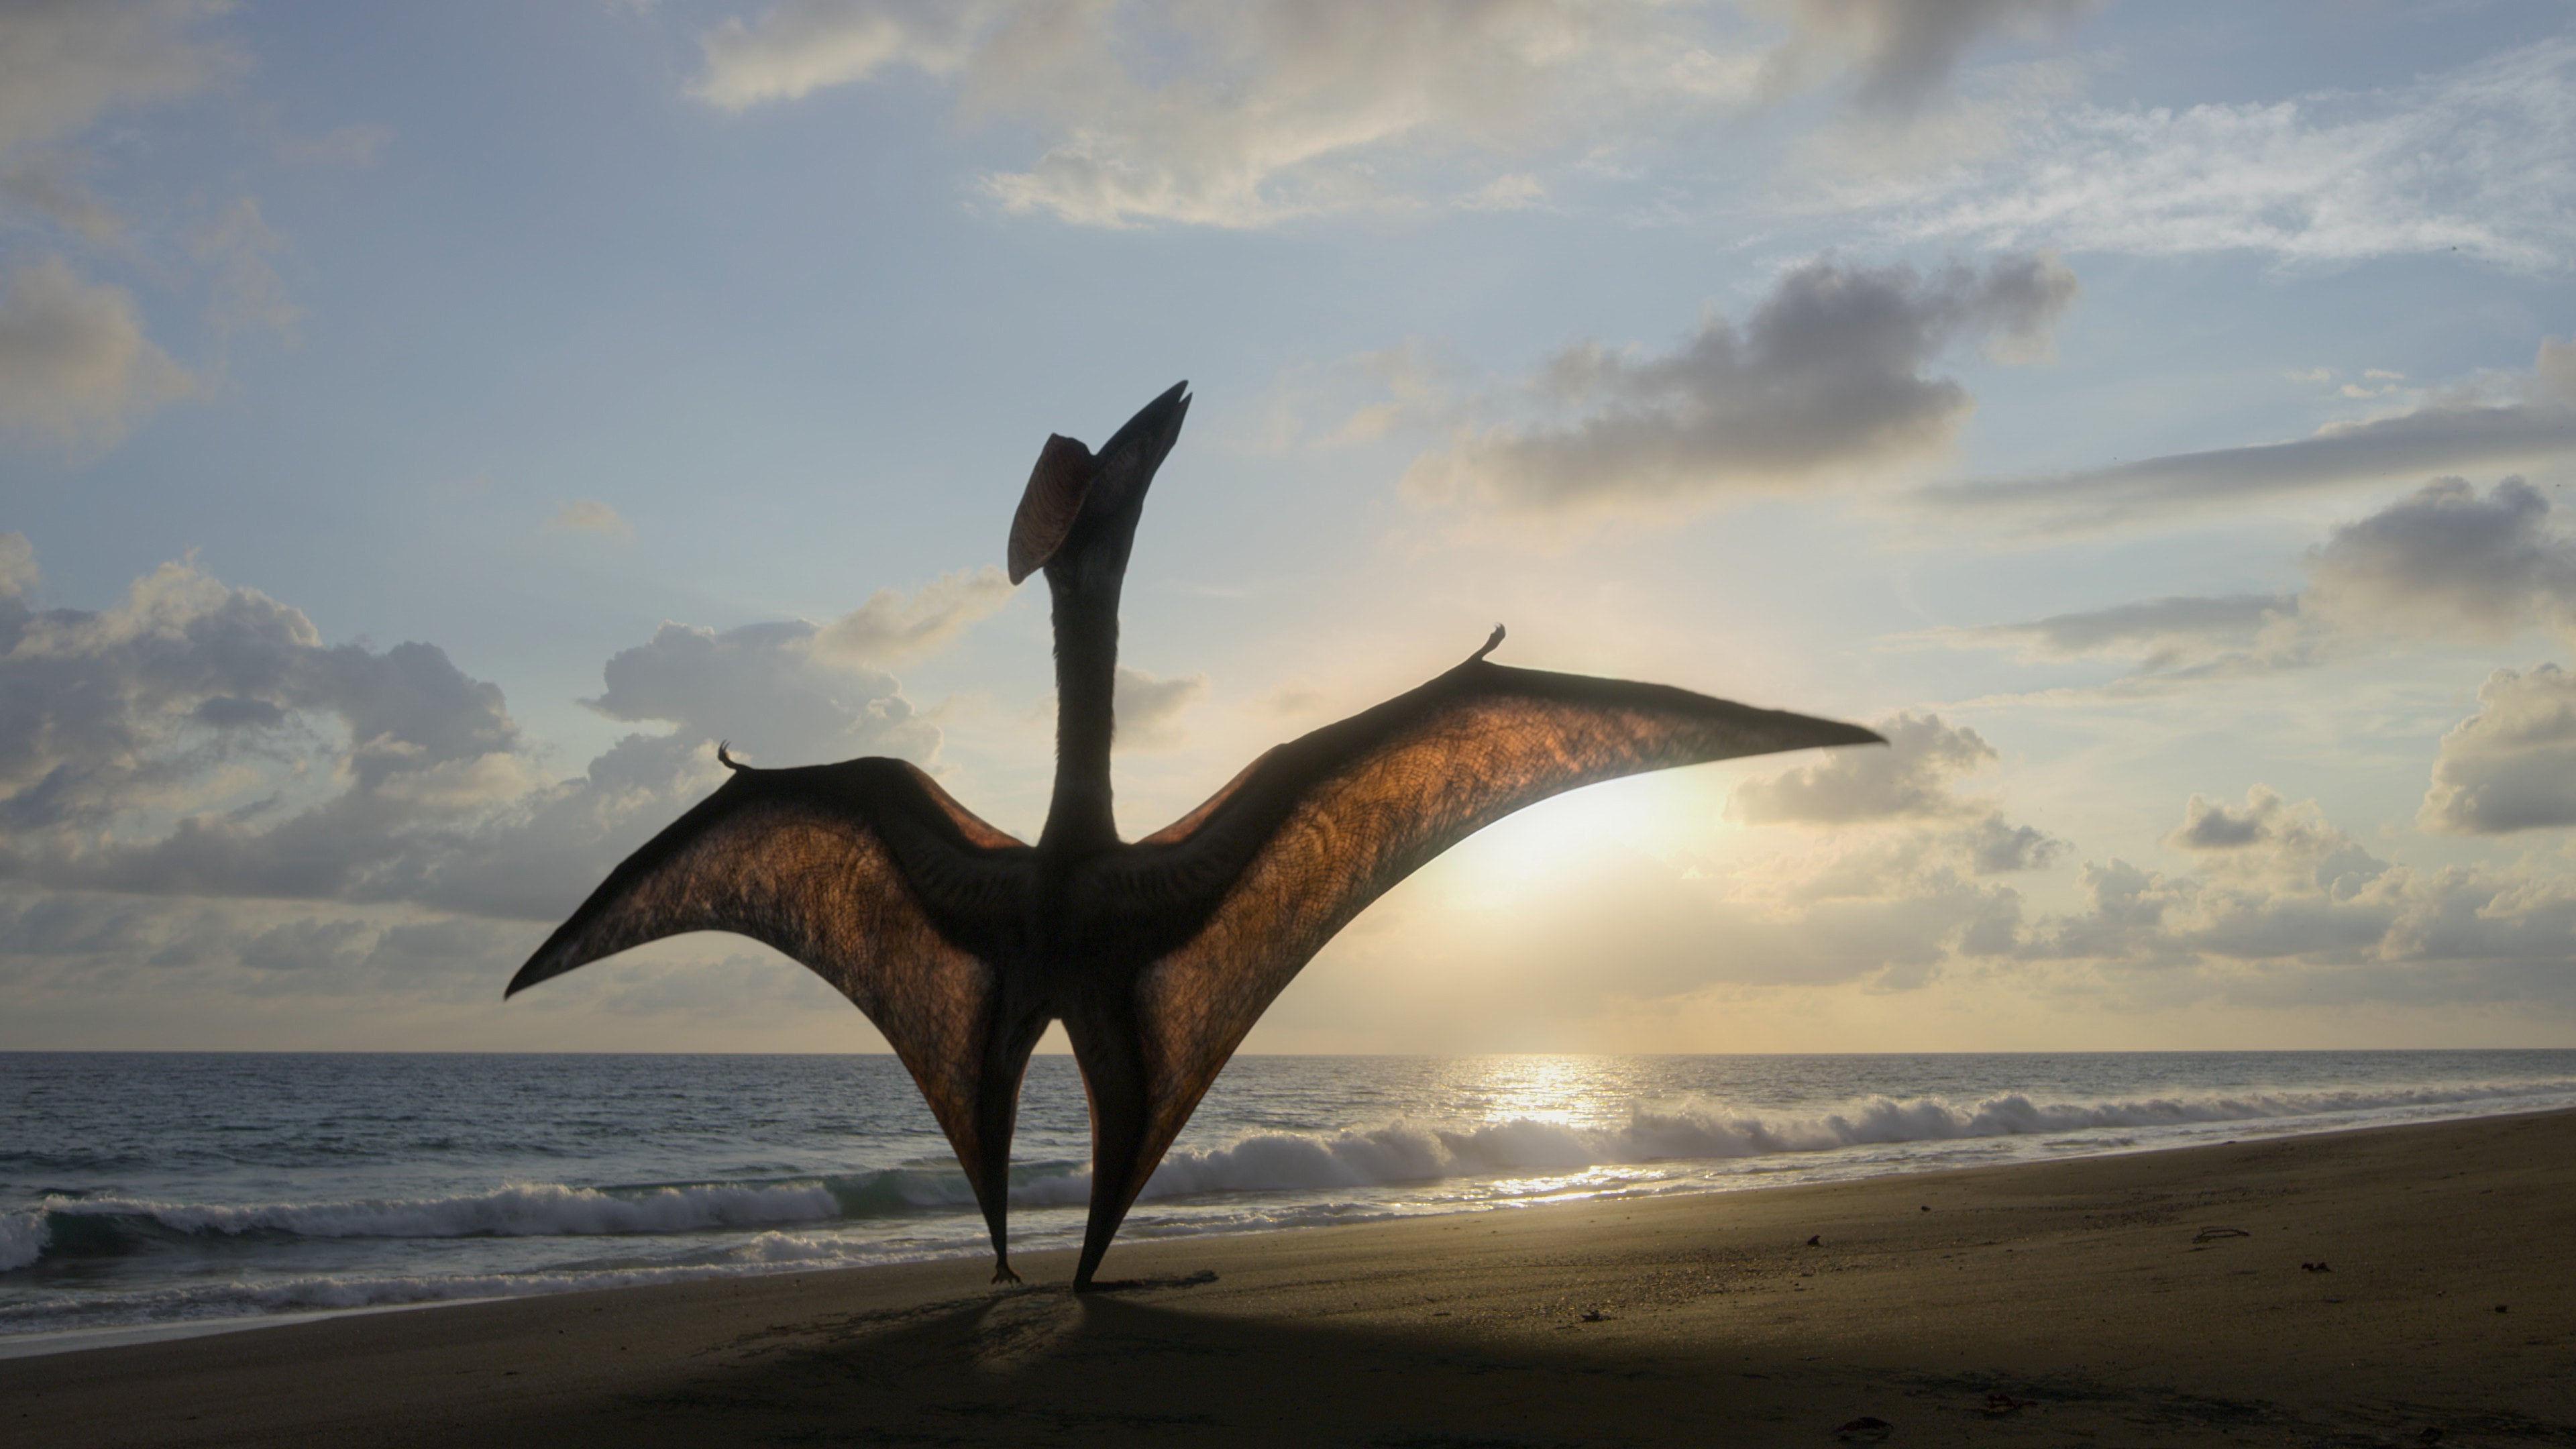 Hatzegopteryx, a Cretaceous pterosaur, stretching out on a beach. (Image: Apple)